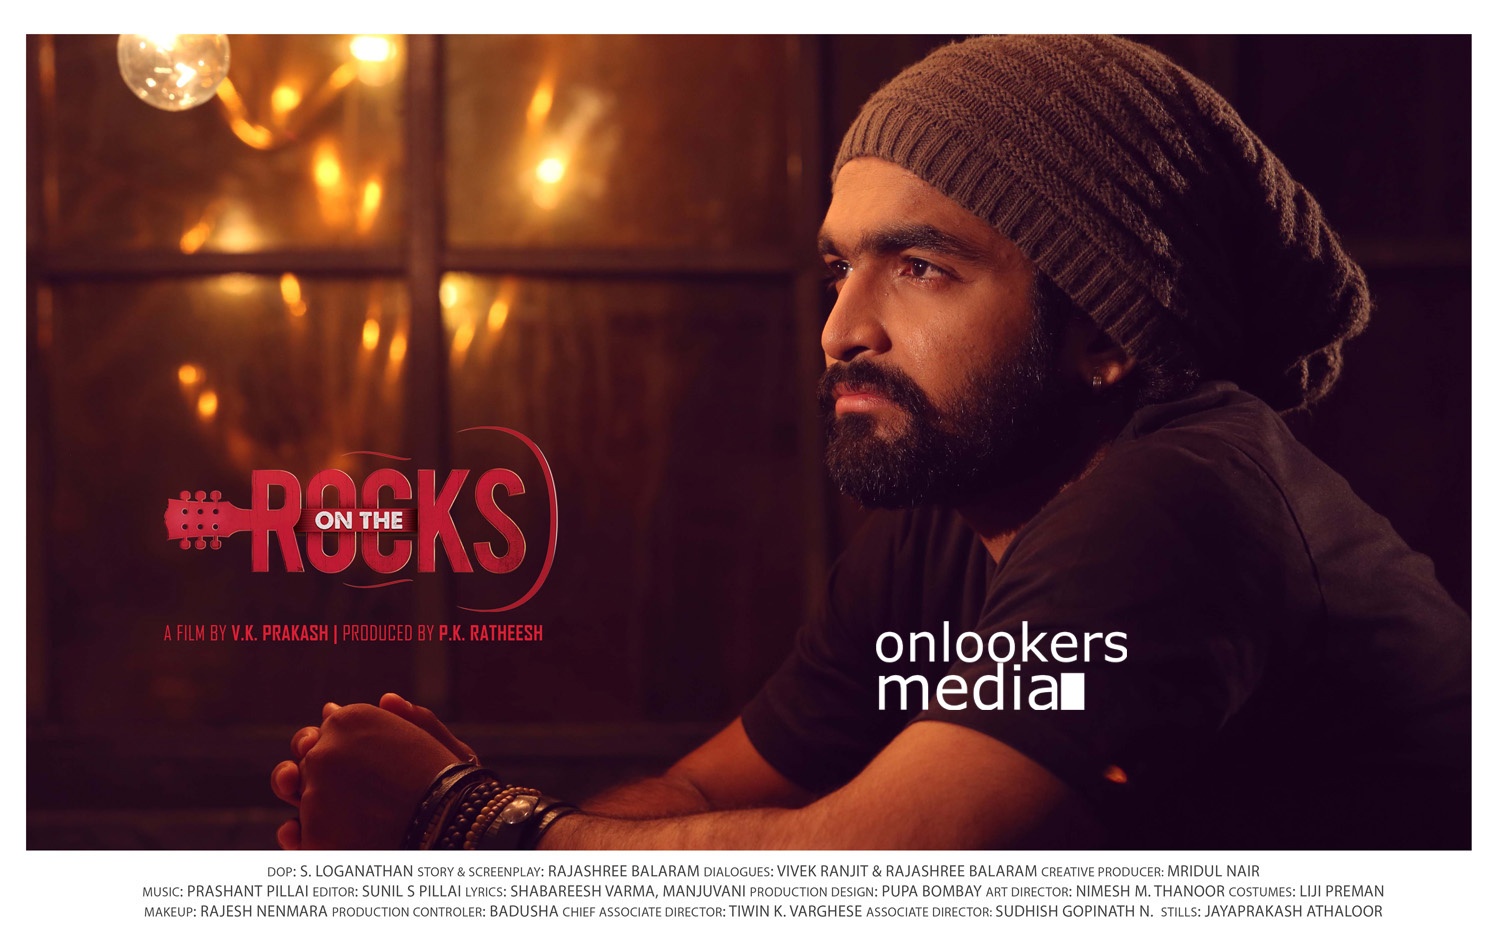 https://onlookersmedia.in/wp-content/uploads/2015/10/Sidharth-Menon-in-On-The-Rocks-Stills-Posters-8.jpg